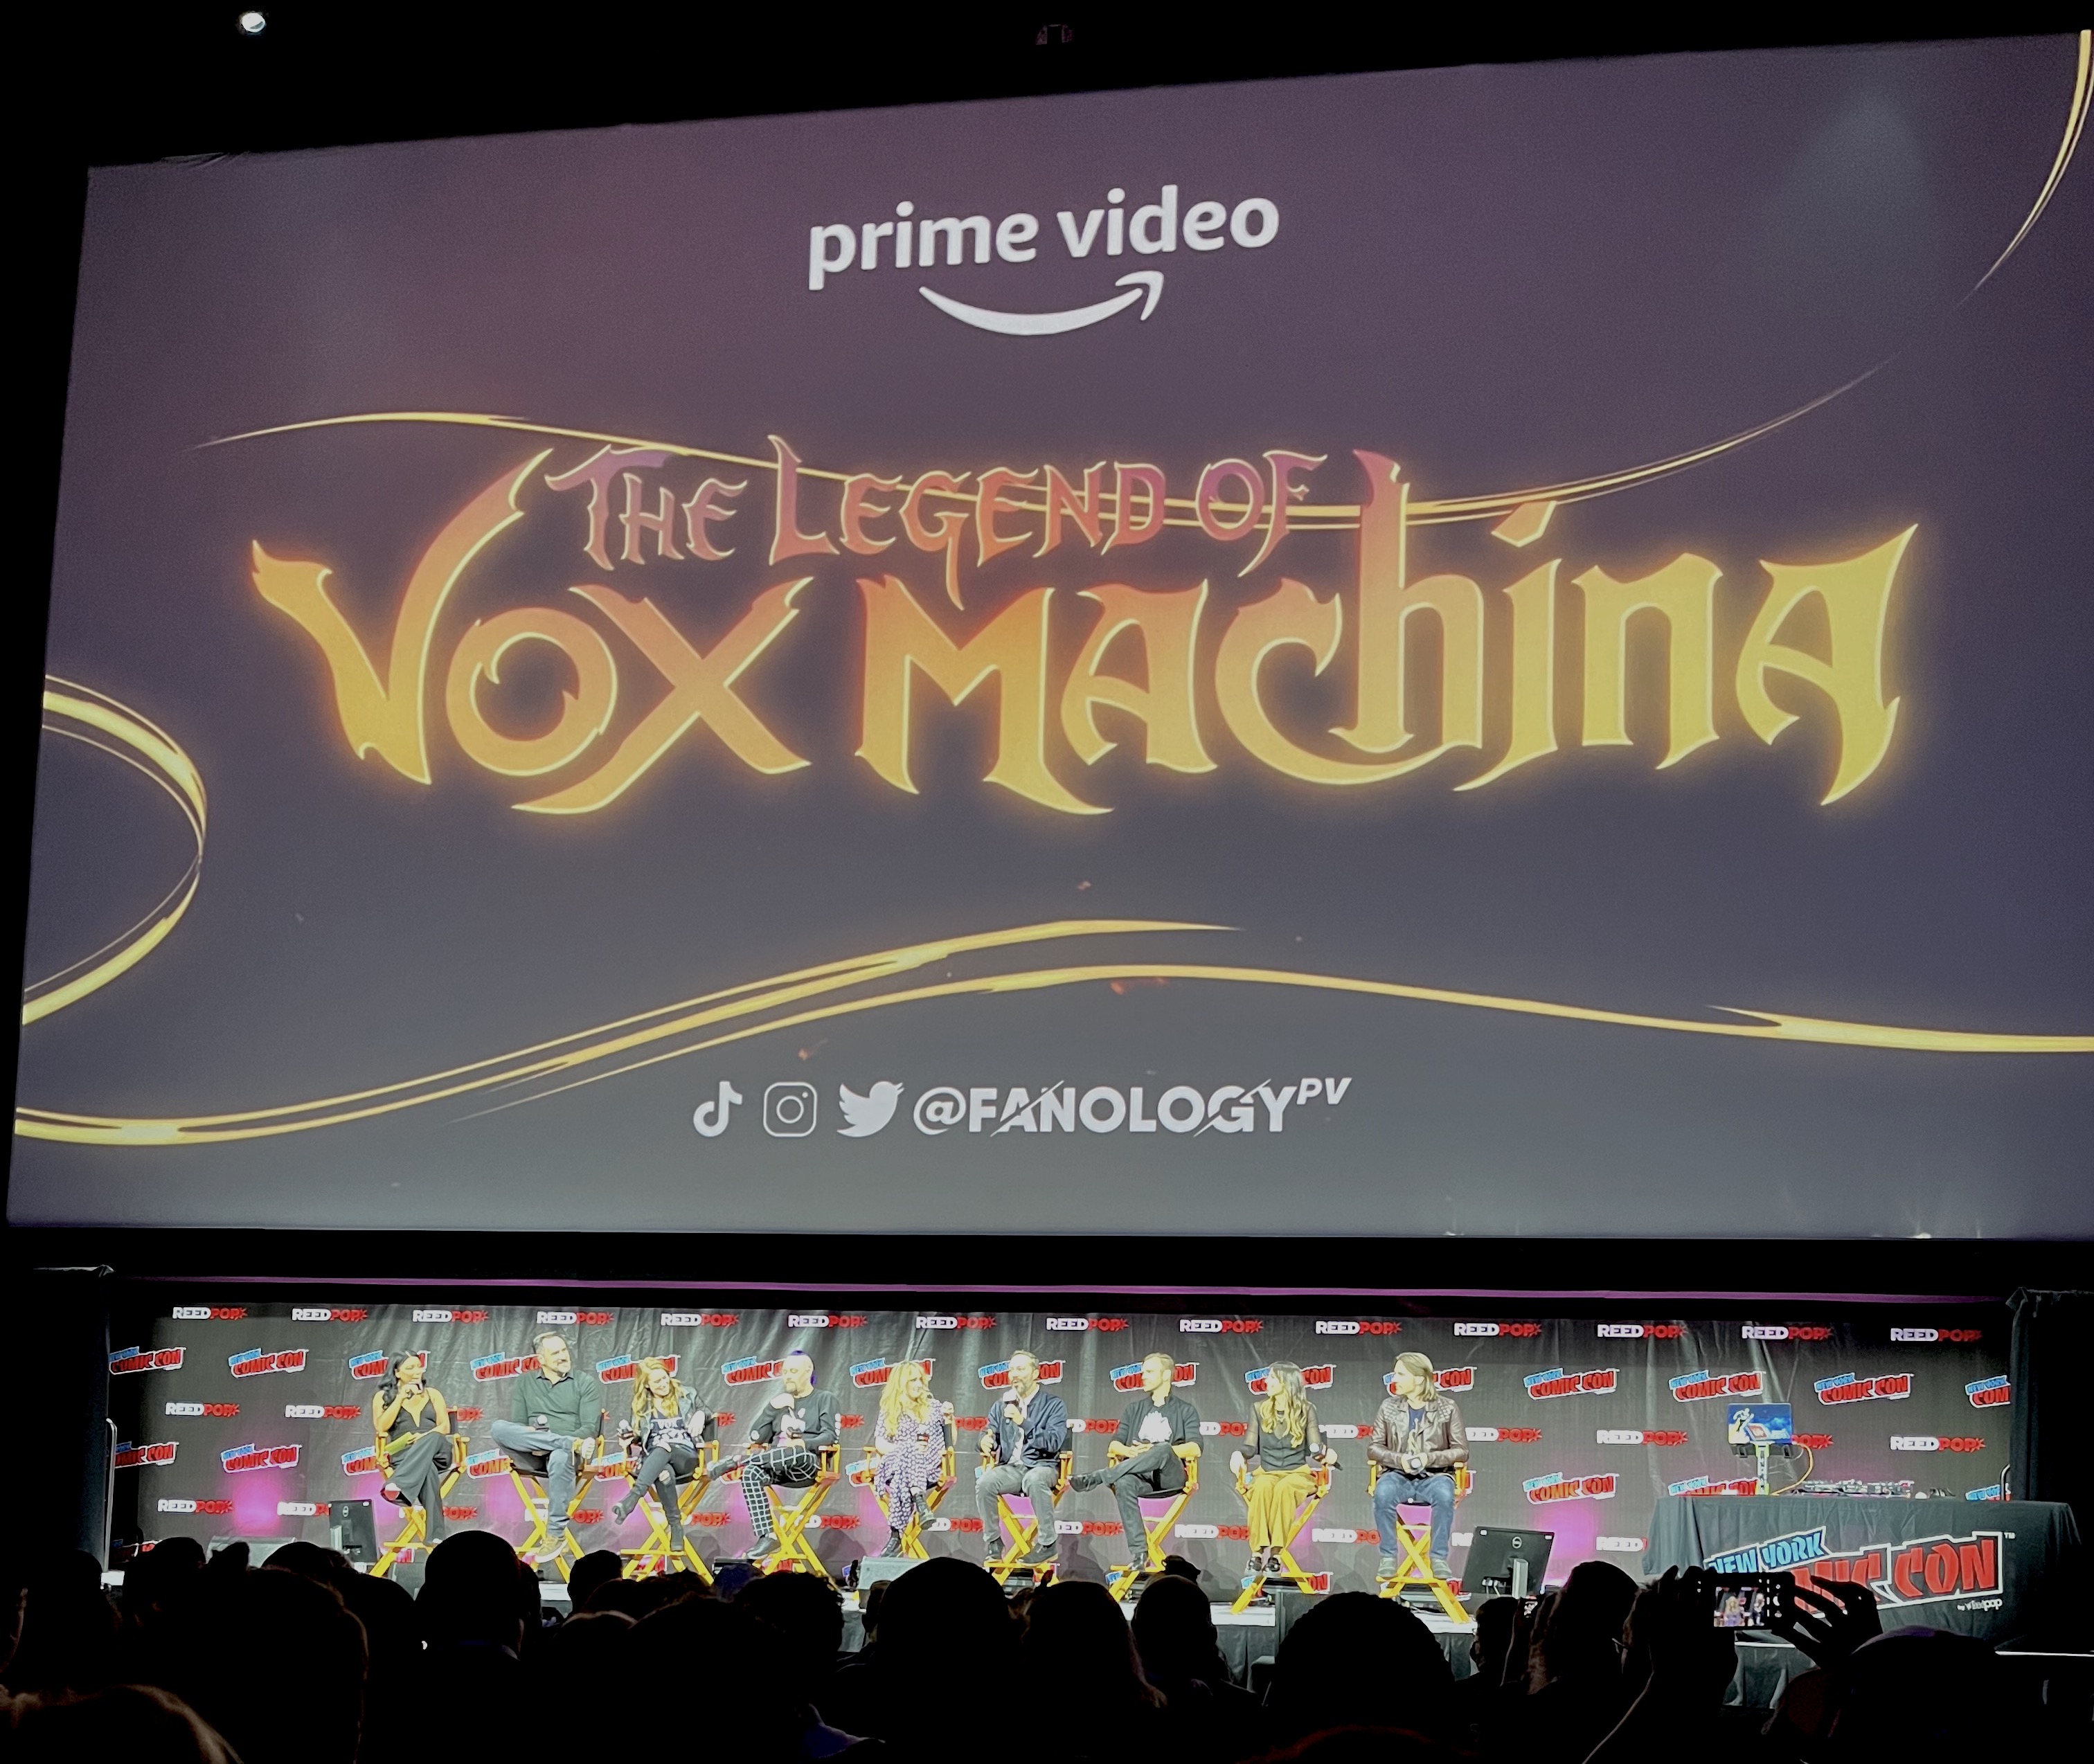 A picture of the New York Comic COn stage with the cast of Critical Role sitting in front of a giant screen projected with the “The Legend of Vox Machina” logo